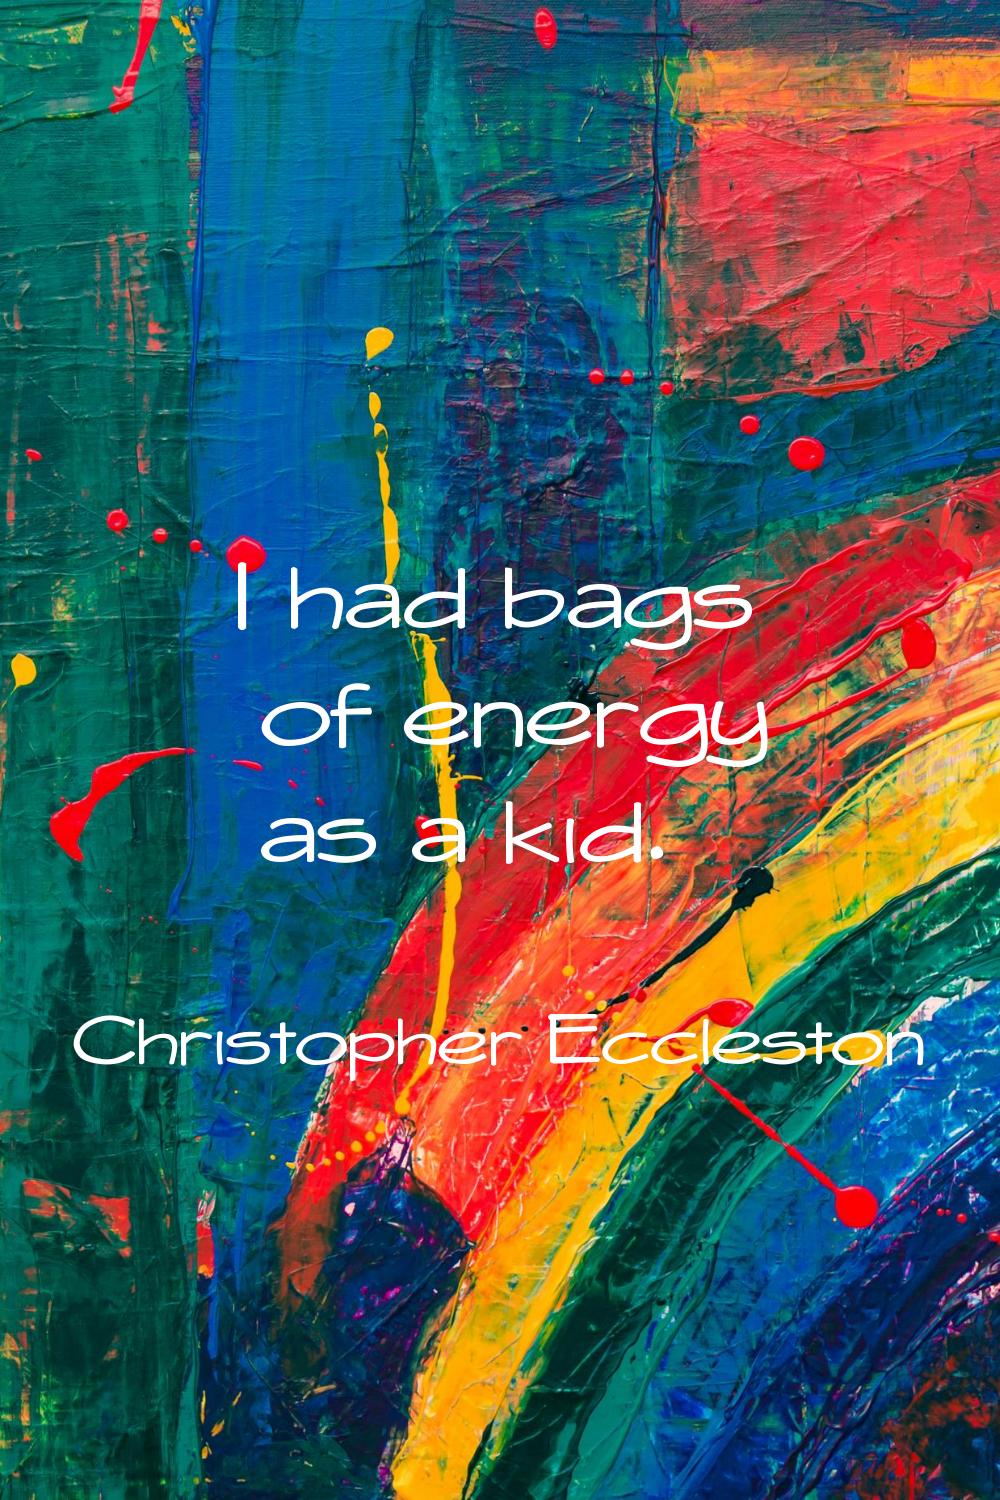 I had bags of energy as a kid.